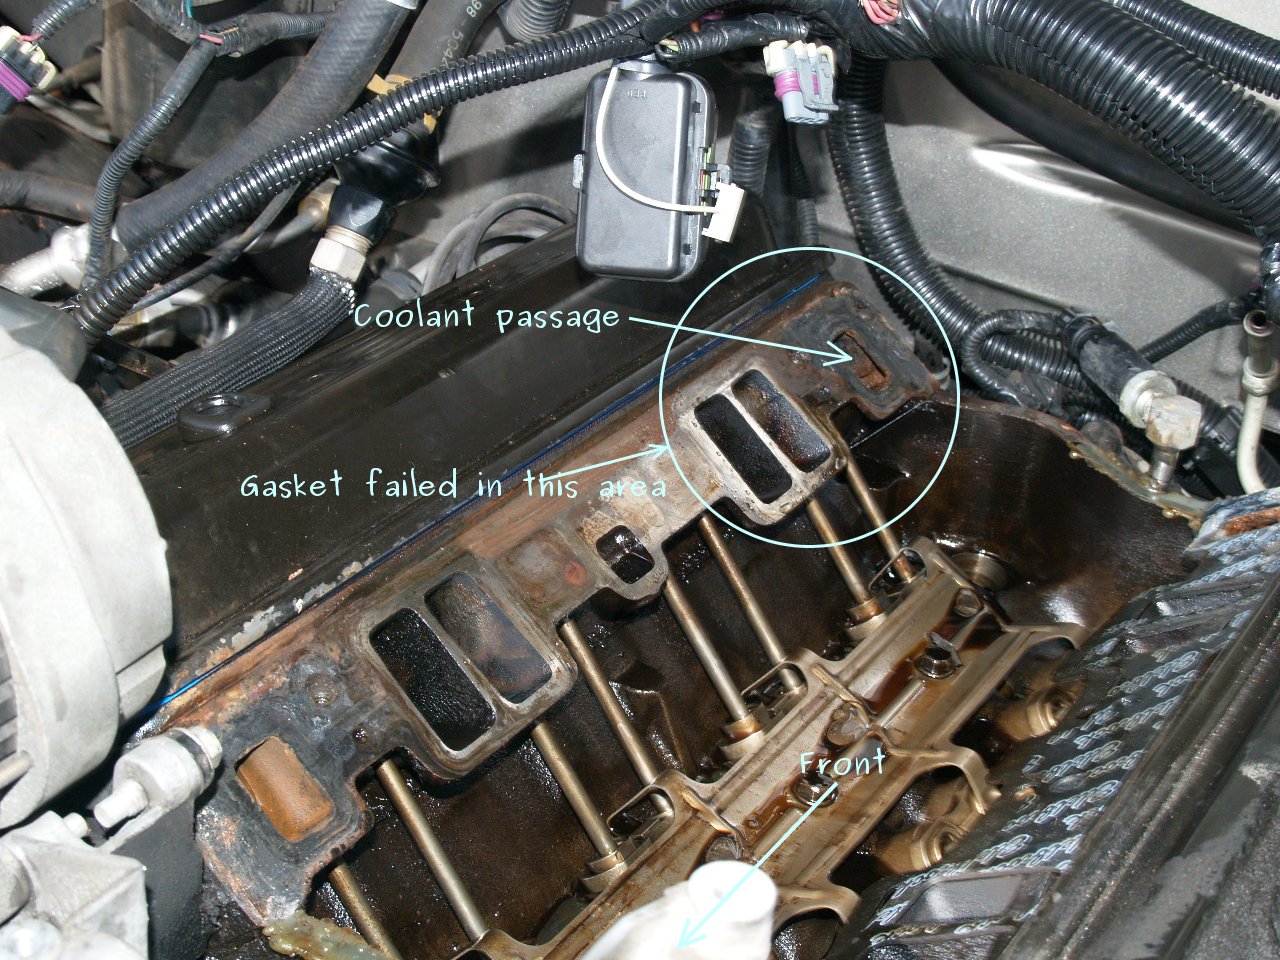 See P02F1 in engine